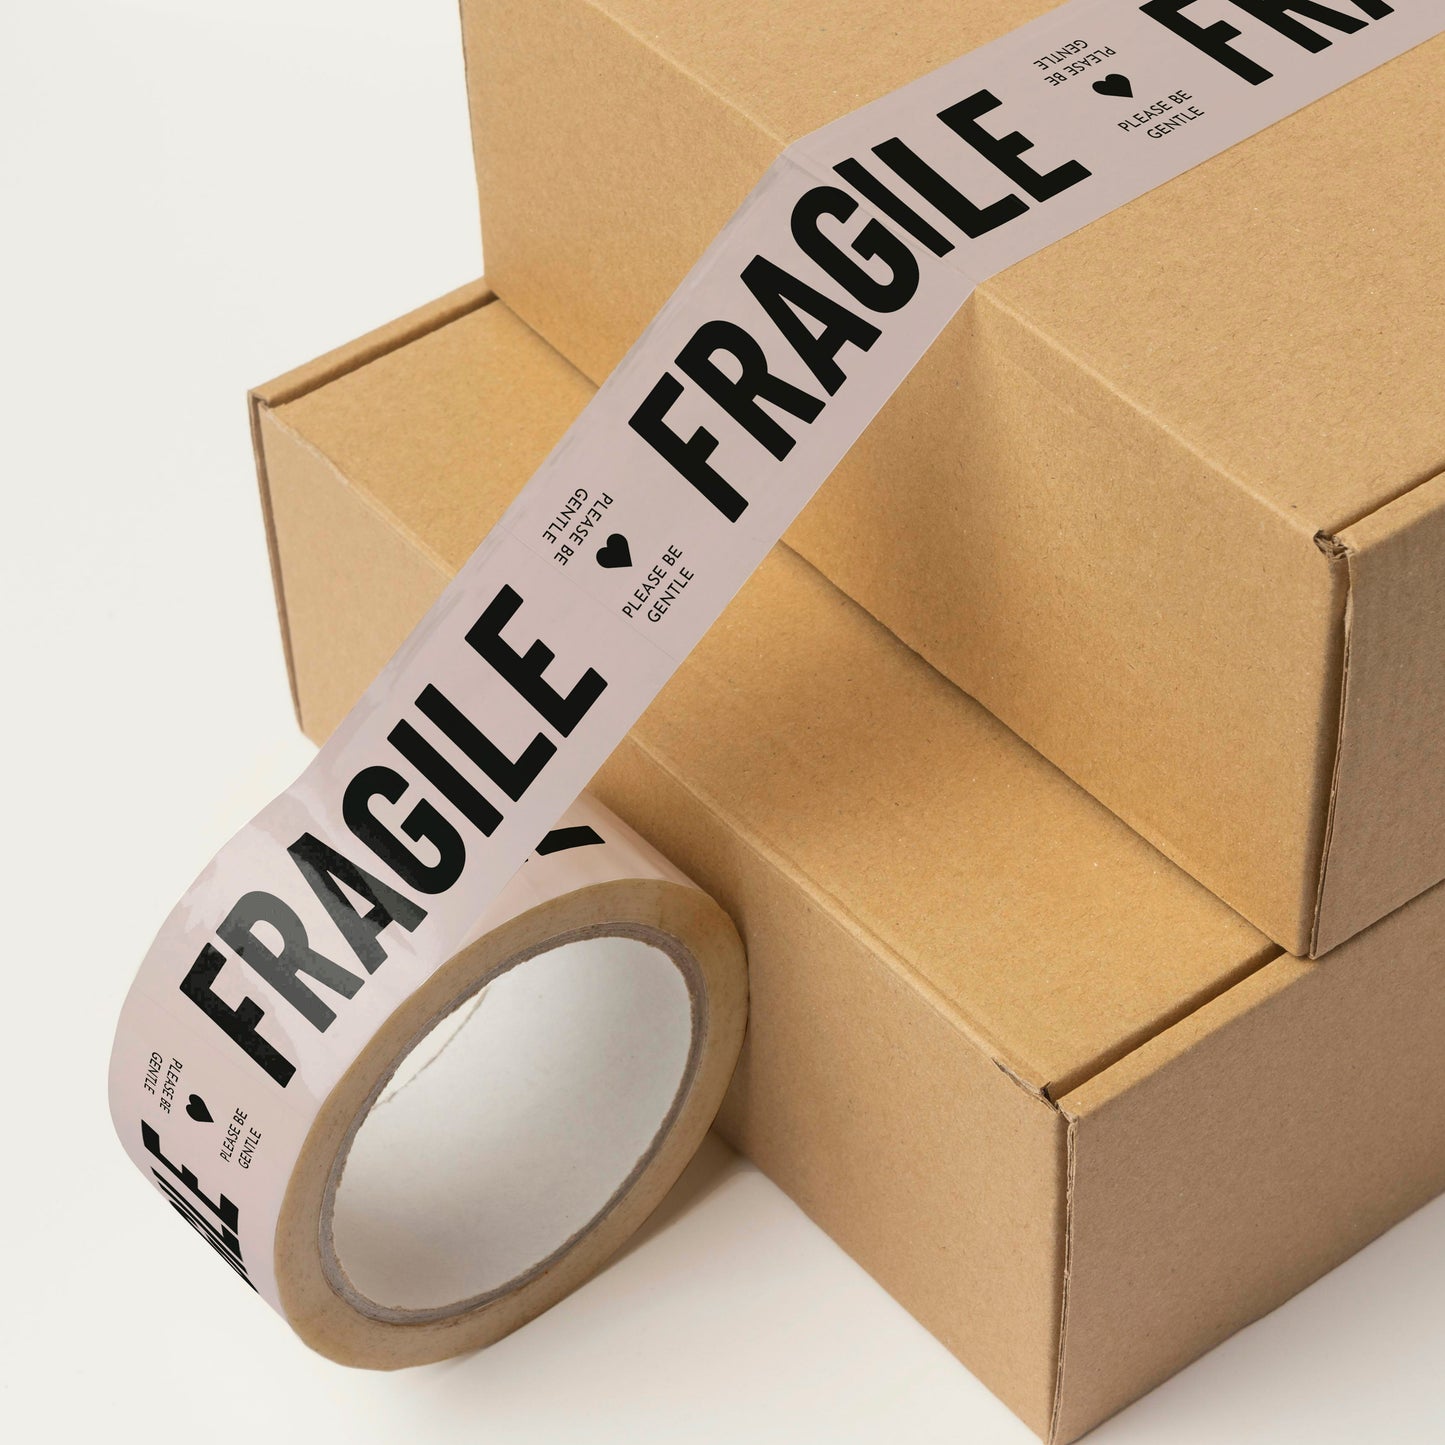 Boxes of ceramics ready for shipping, secured with high-quality cream and black tape that reads 'Fragile, Please Be Gentle'.